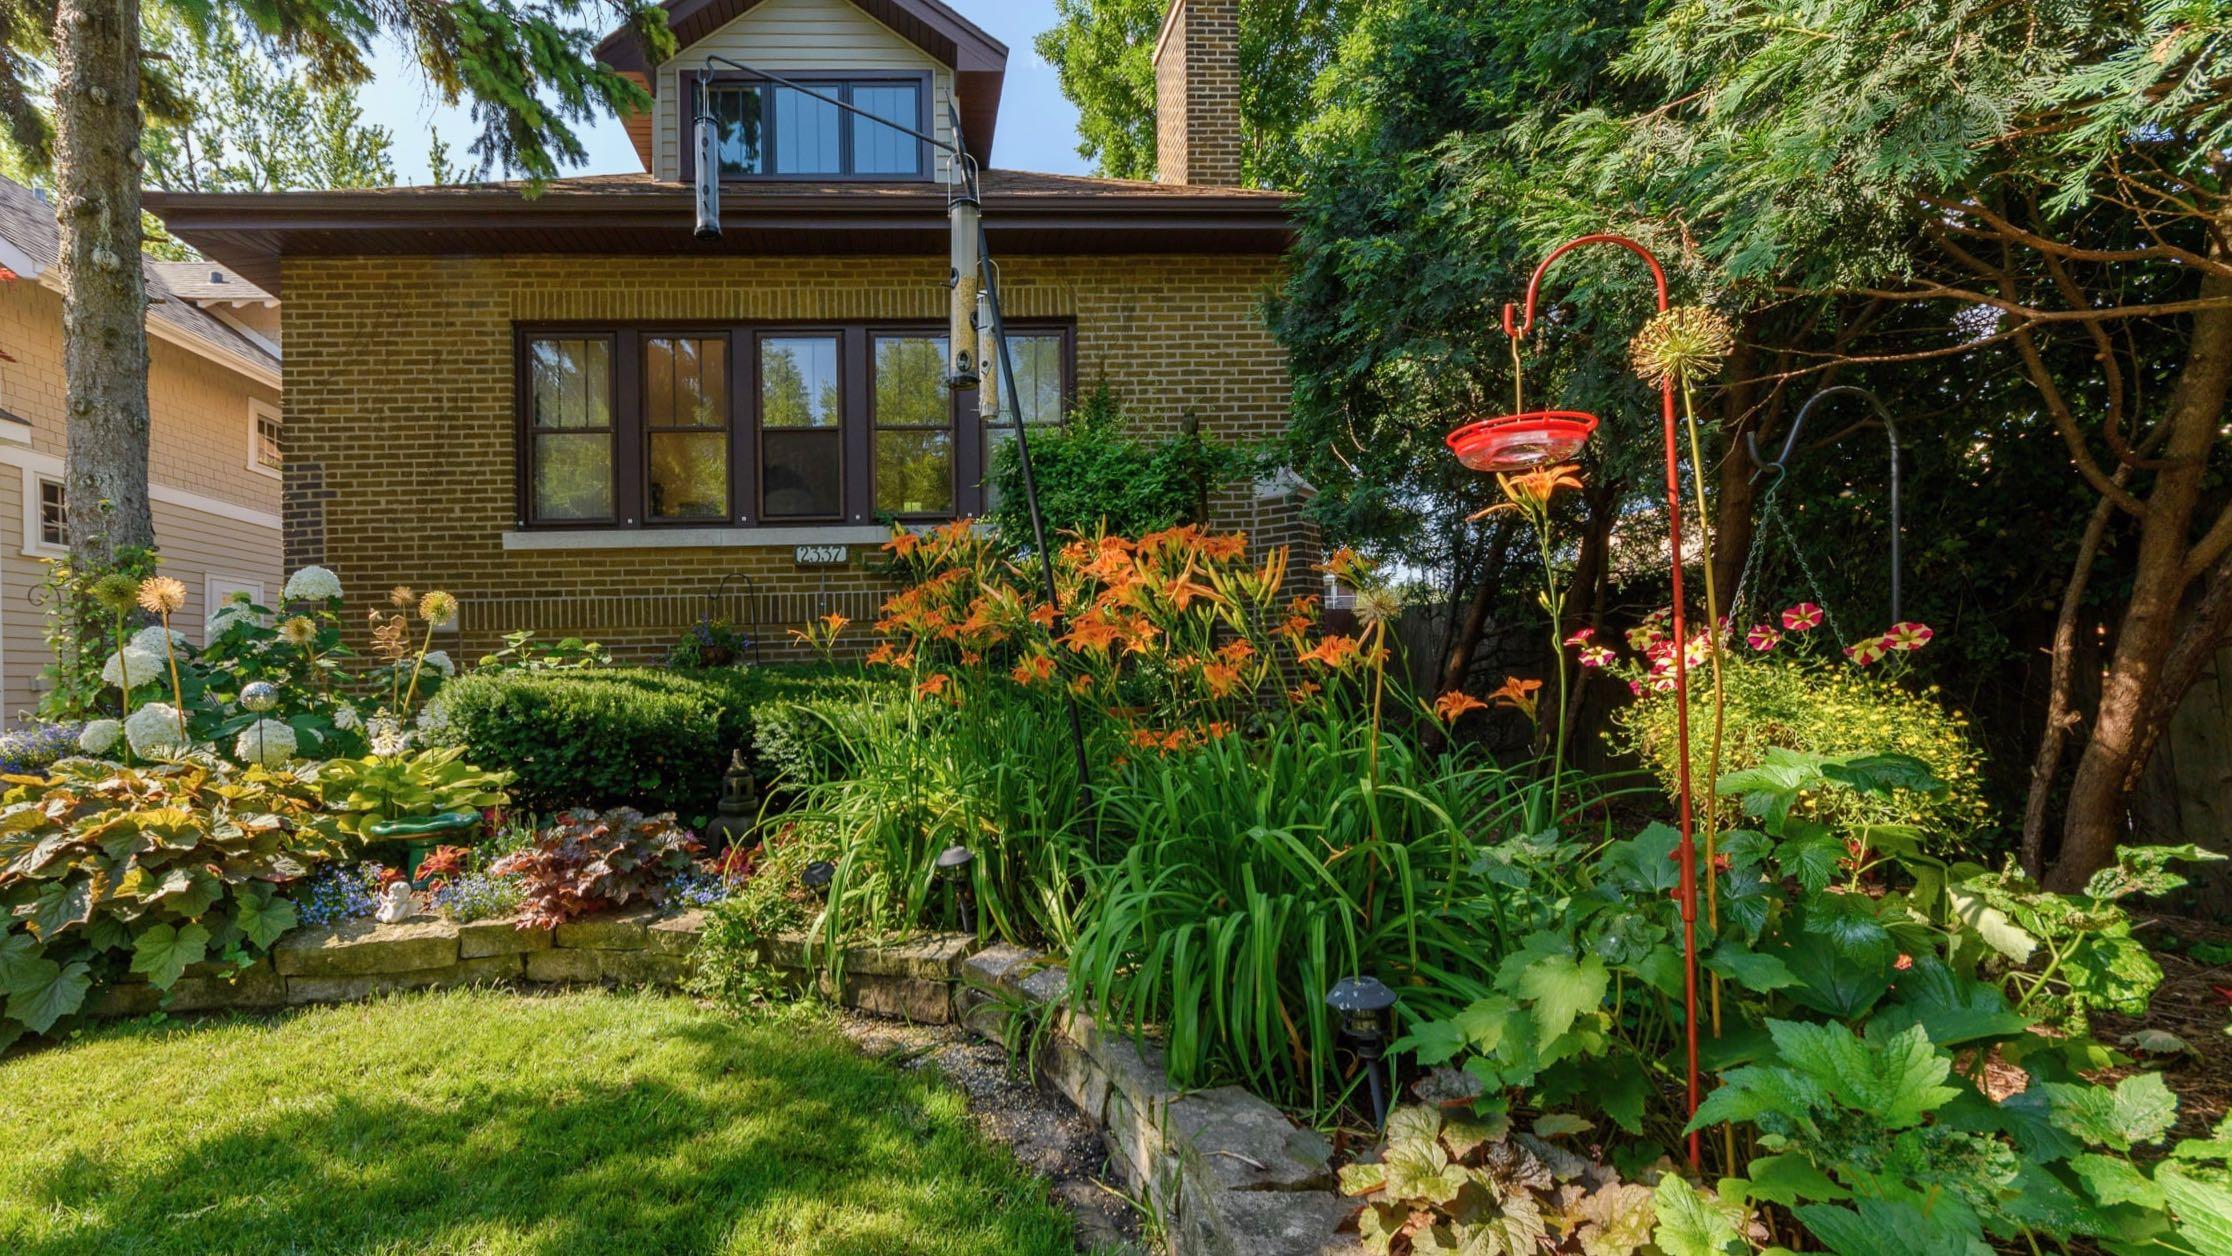 A past winner in the front garden category. (Chicago Bungalow Association)